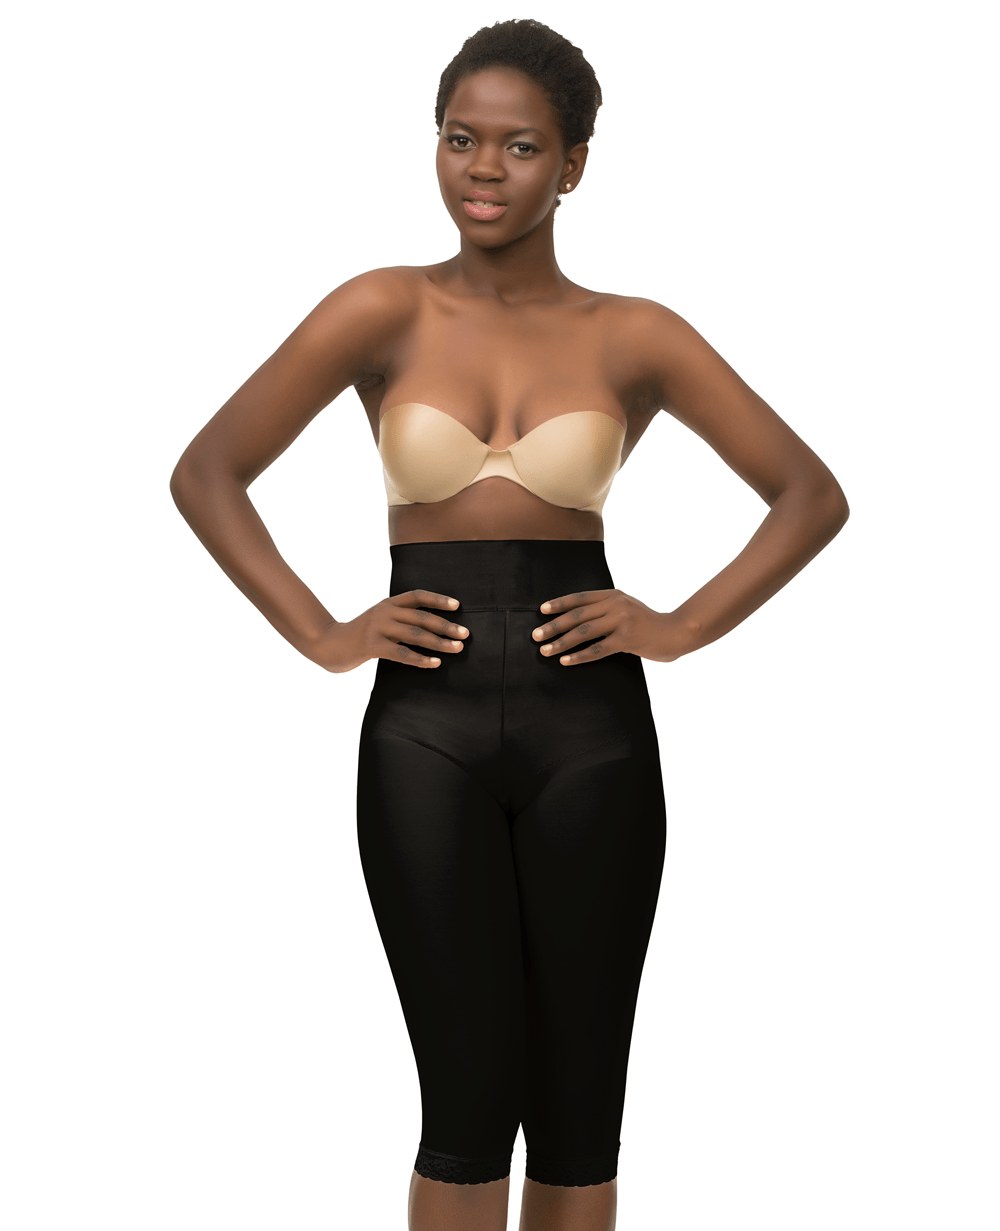 2nd Stage High Waist Below the Knee Buttocks Enhancing Compression Girdle (BE04-BK) - Isavela Compression Garments